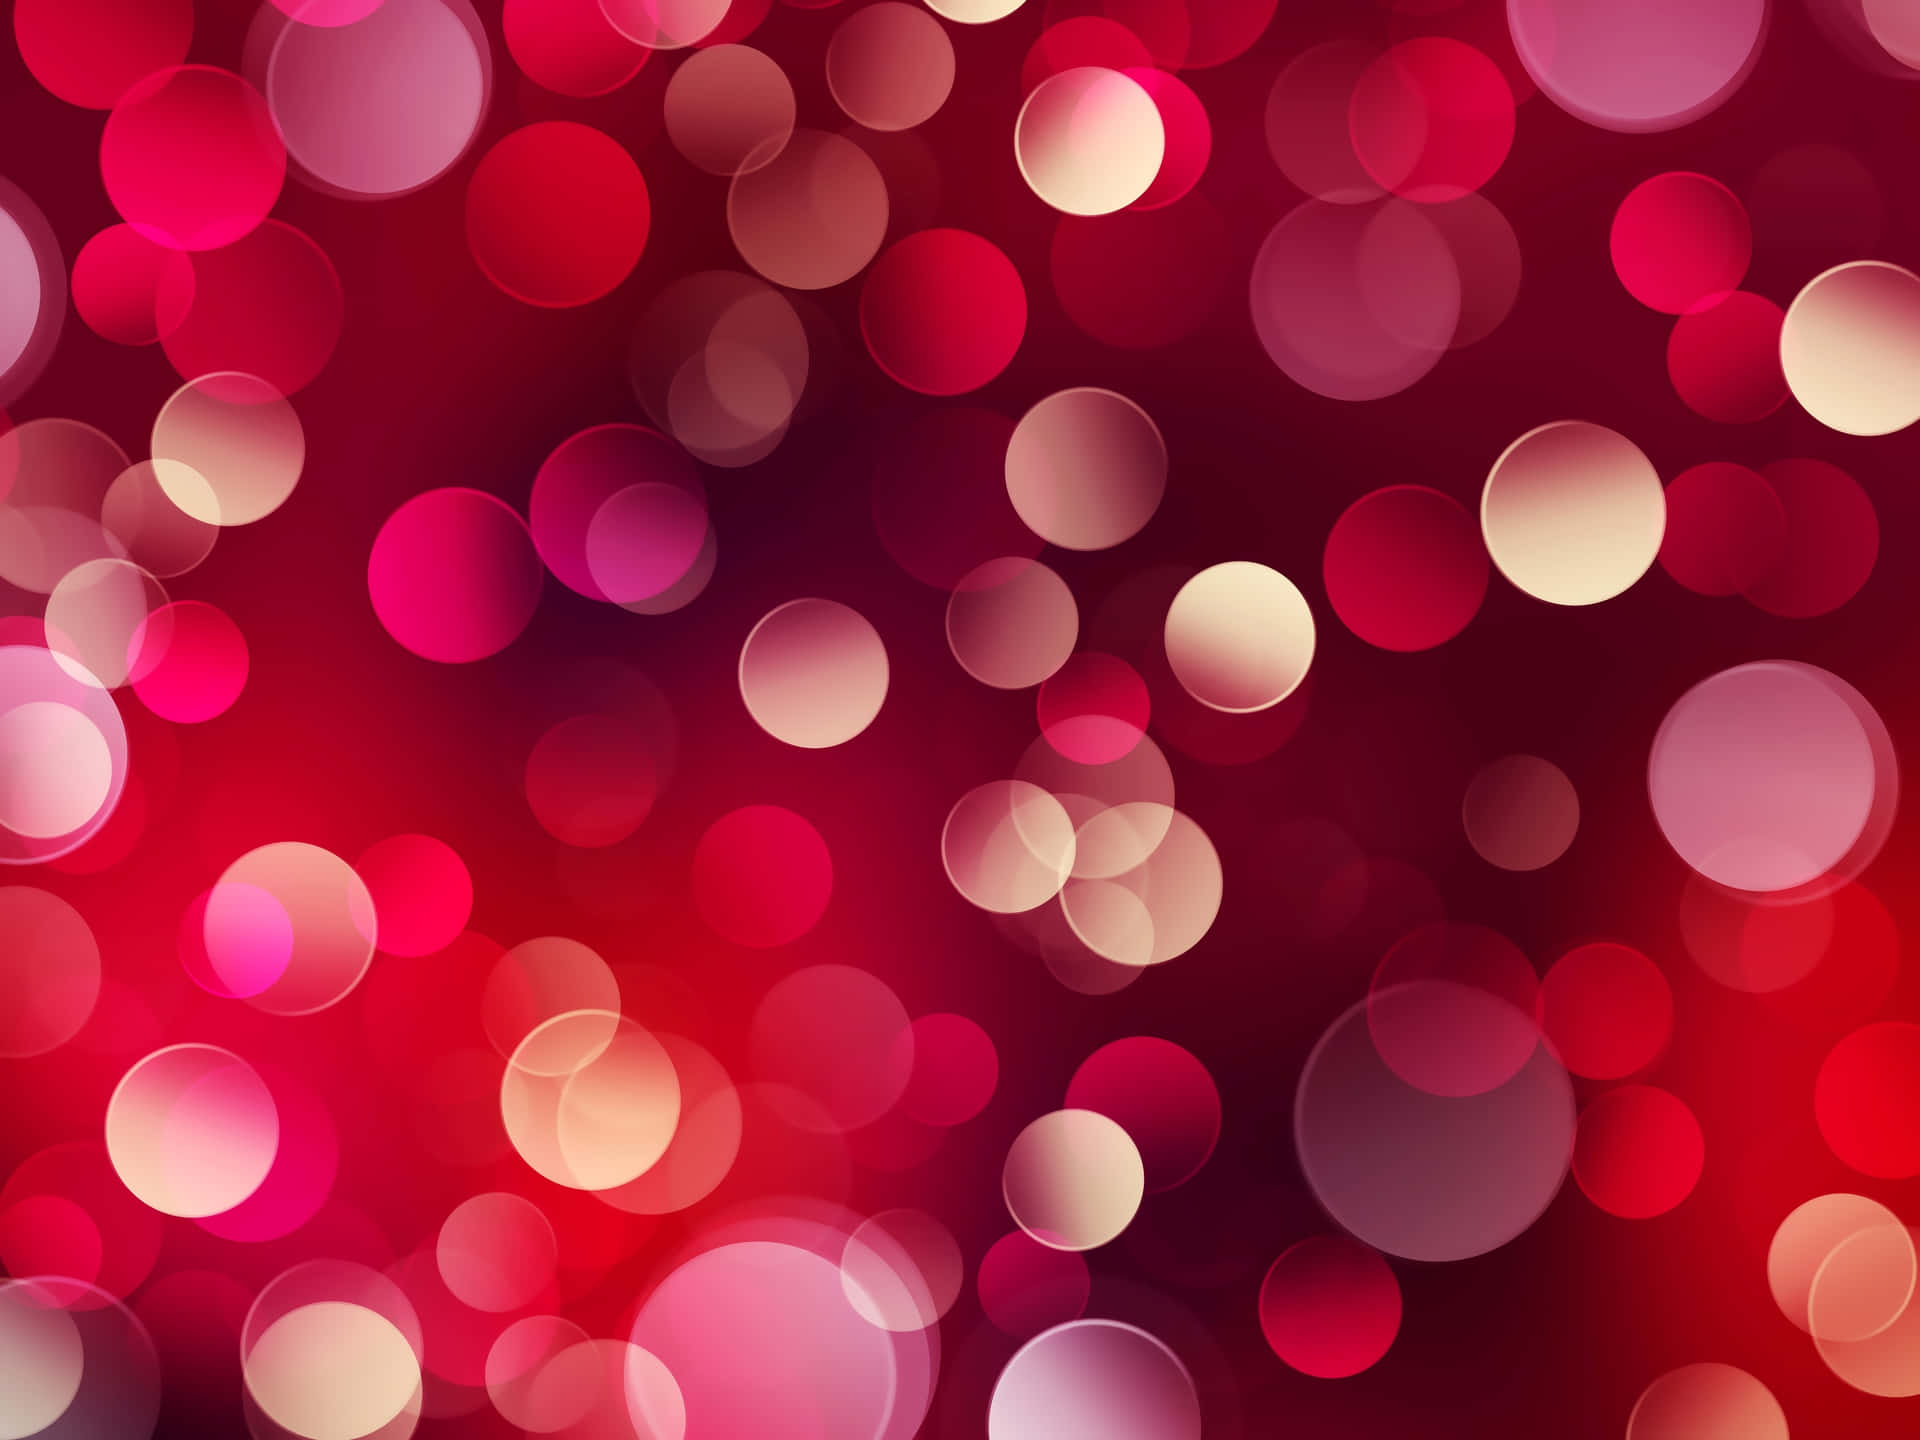 A Vibrant Bokeh Background to Brighten Up Any Room